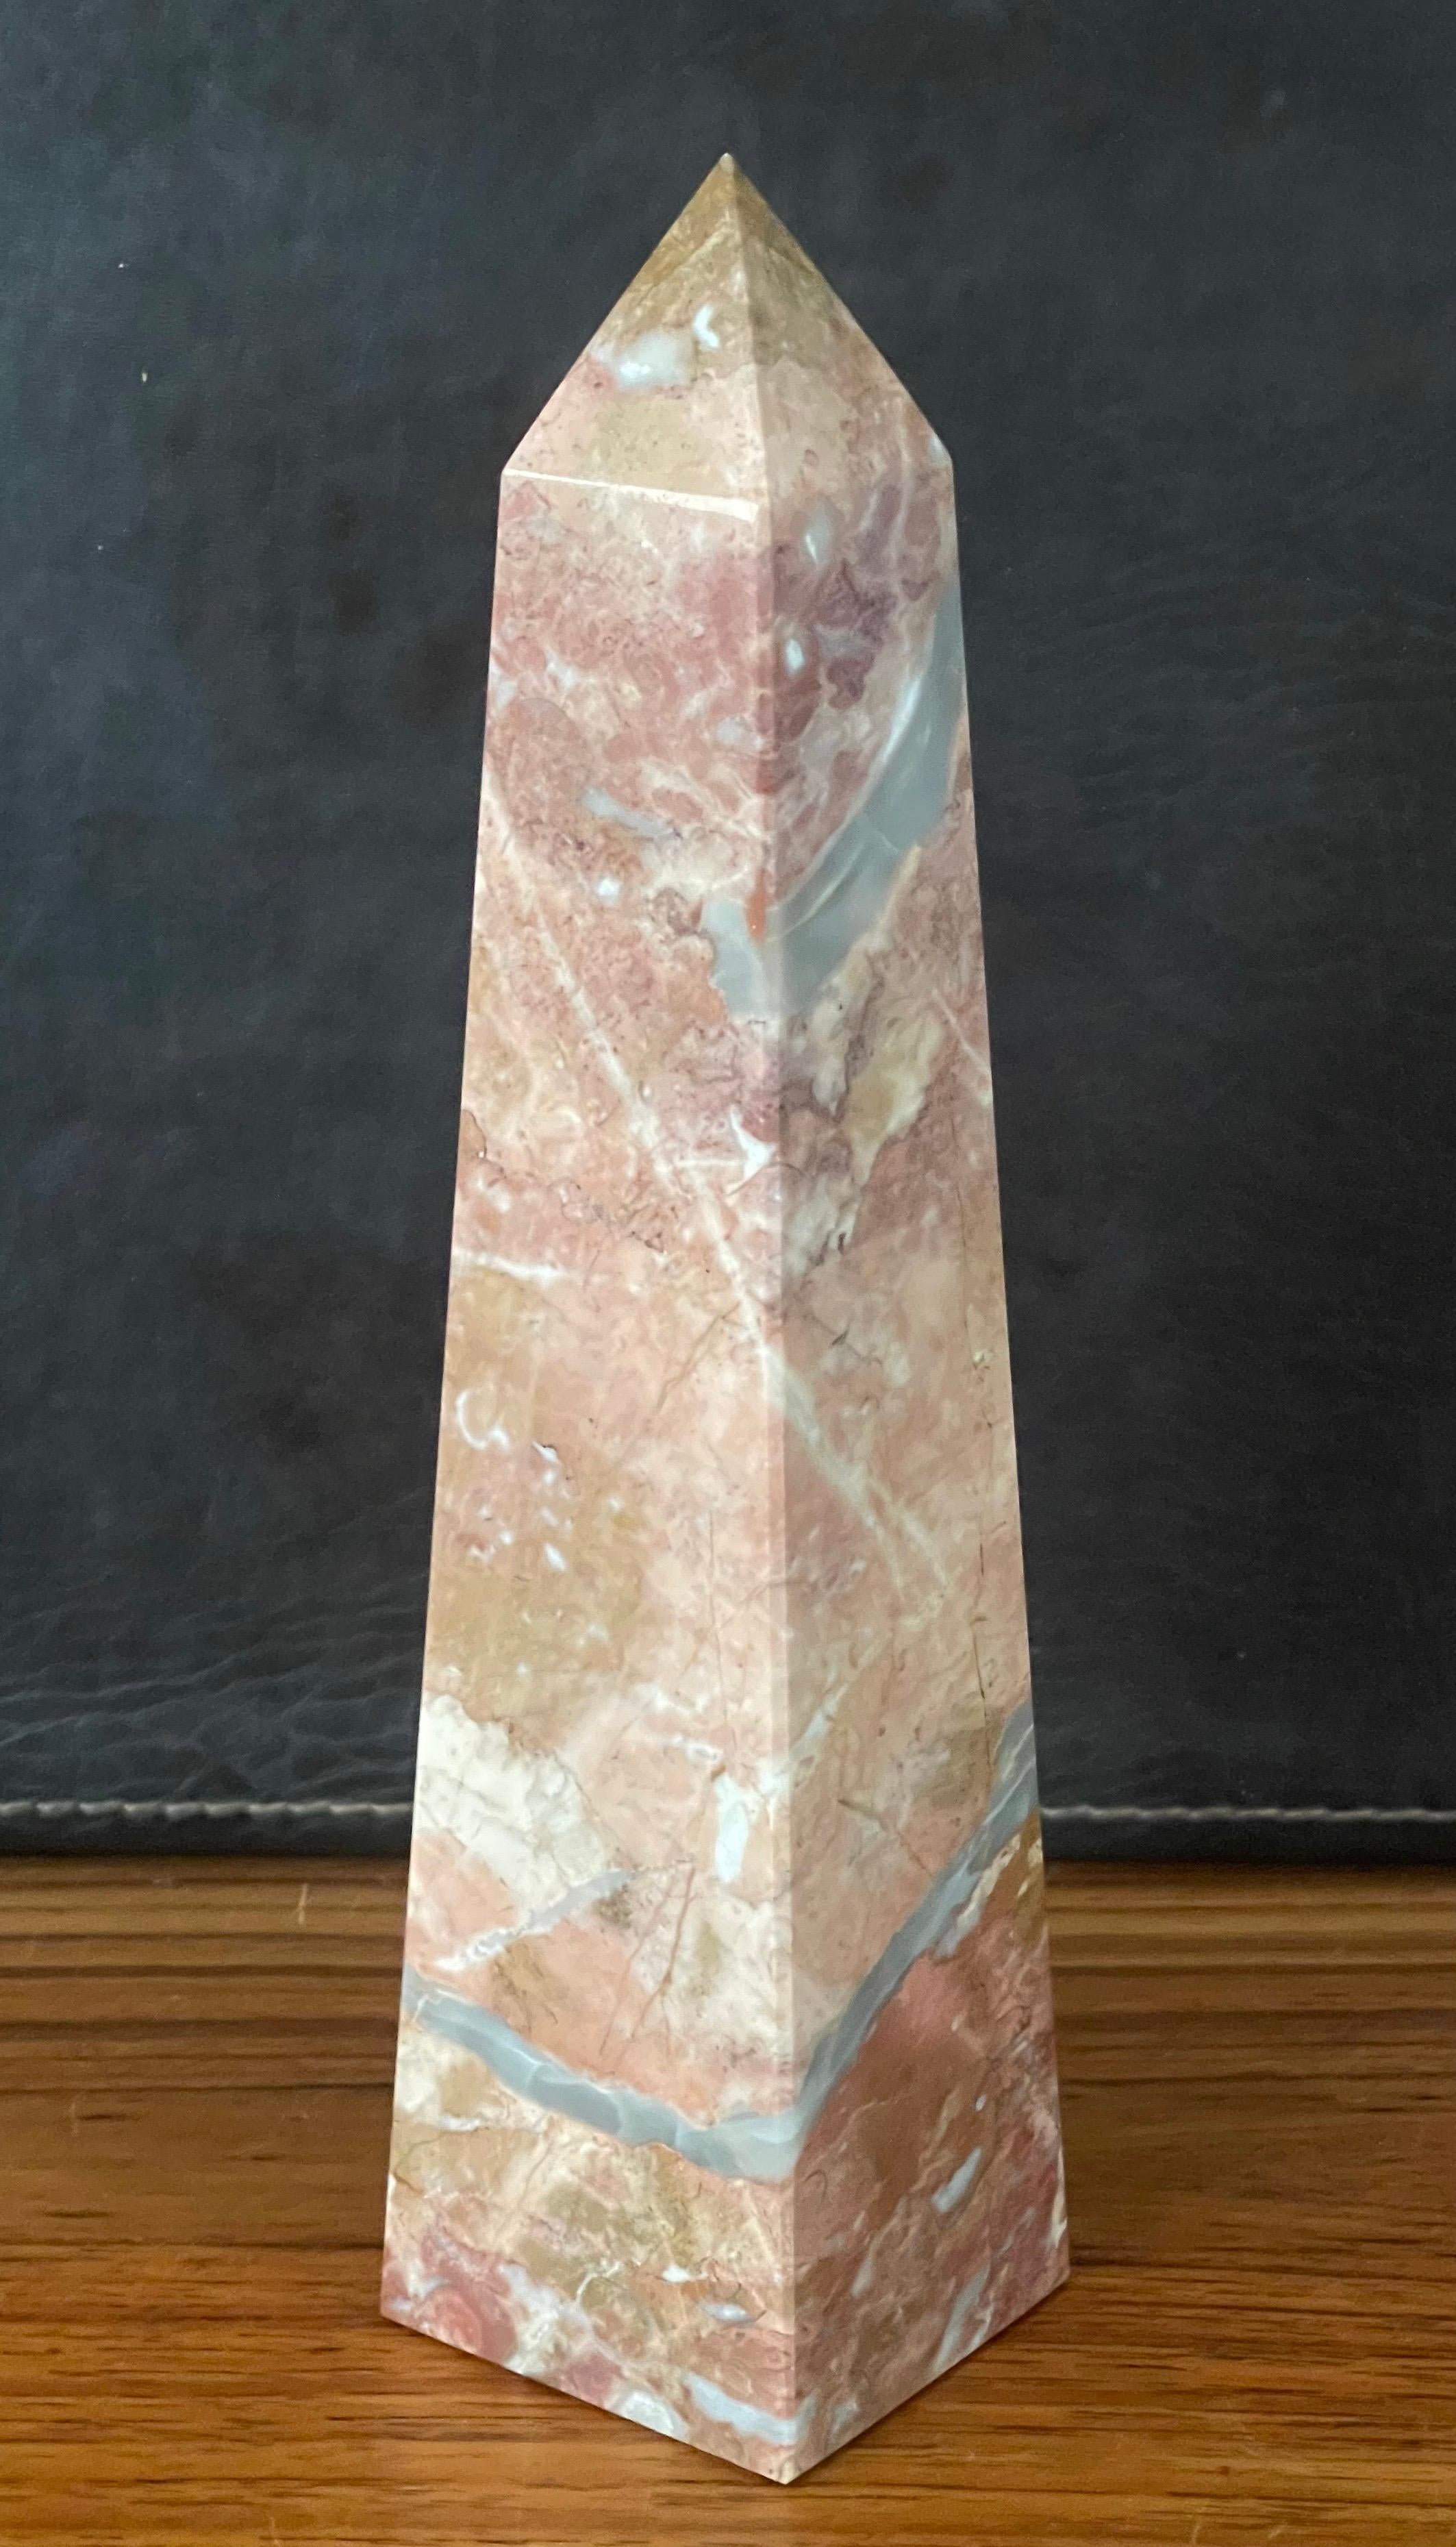 Beautiful solid marble decorative obelisk, circa 1970s. The piece is in very good vintage condition with no chips or cracks and is nicely polished. The piece is 2.875